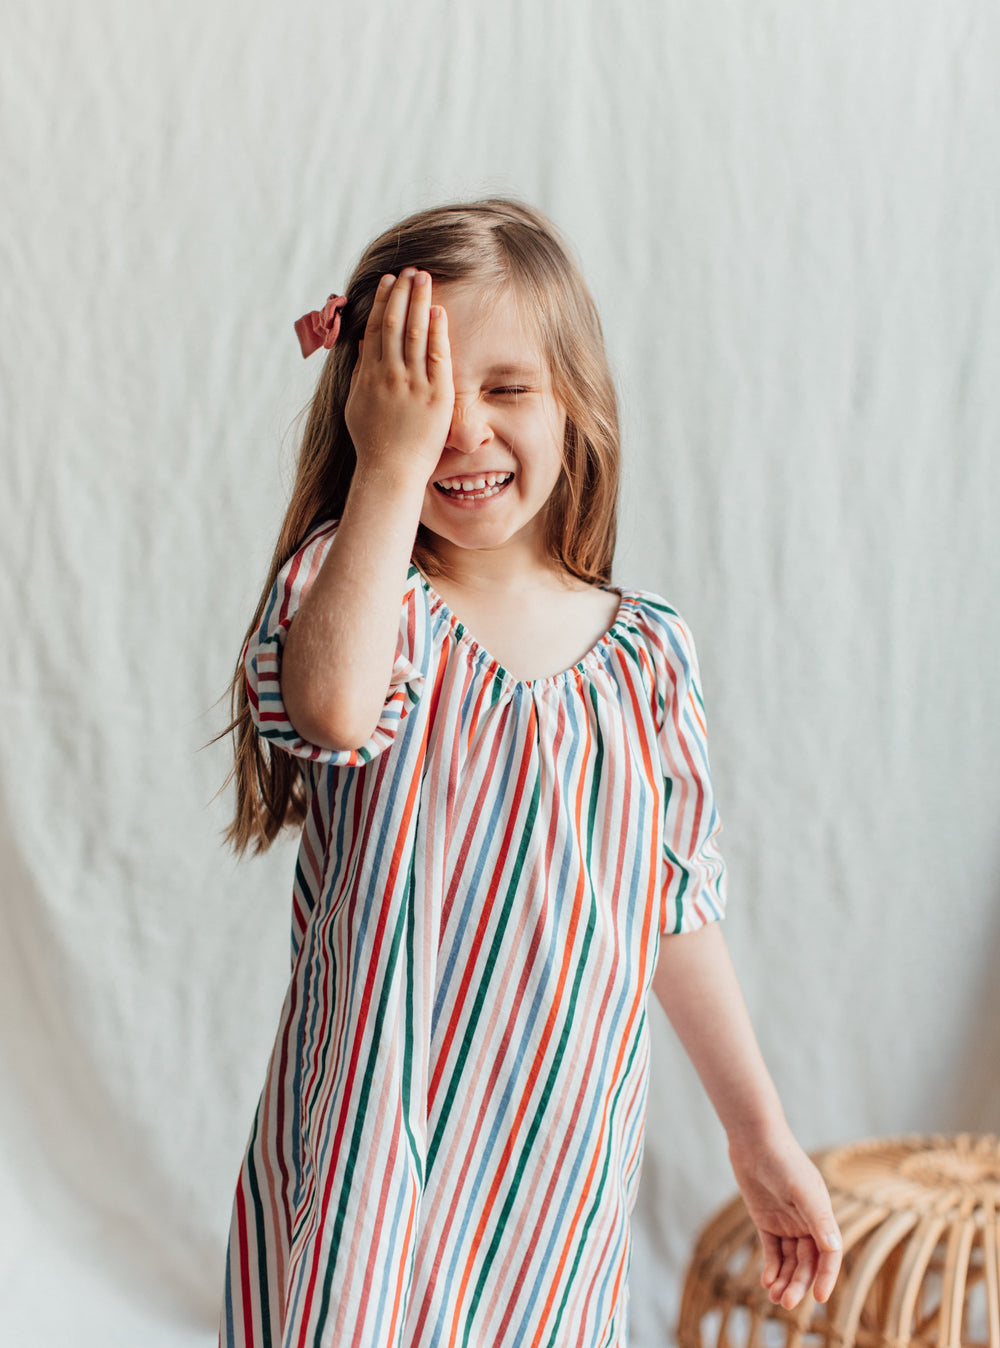 Girl's Colorful Striped Nightgown. Available in Sizes 2T-3T, 4-5, 6-7 and 8-9. Both Long Sleeve and Short Sleeve. 100% Soft Cotton Nightgown for Toddlers and Kids.